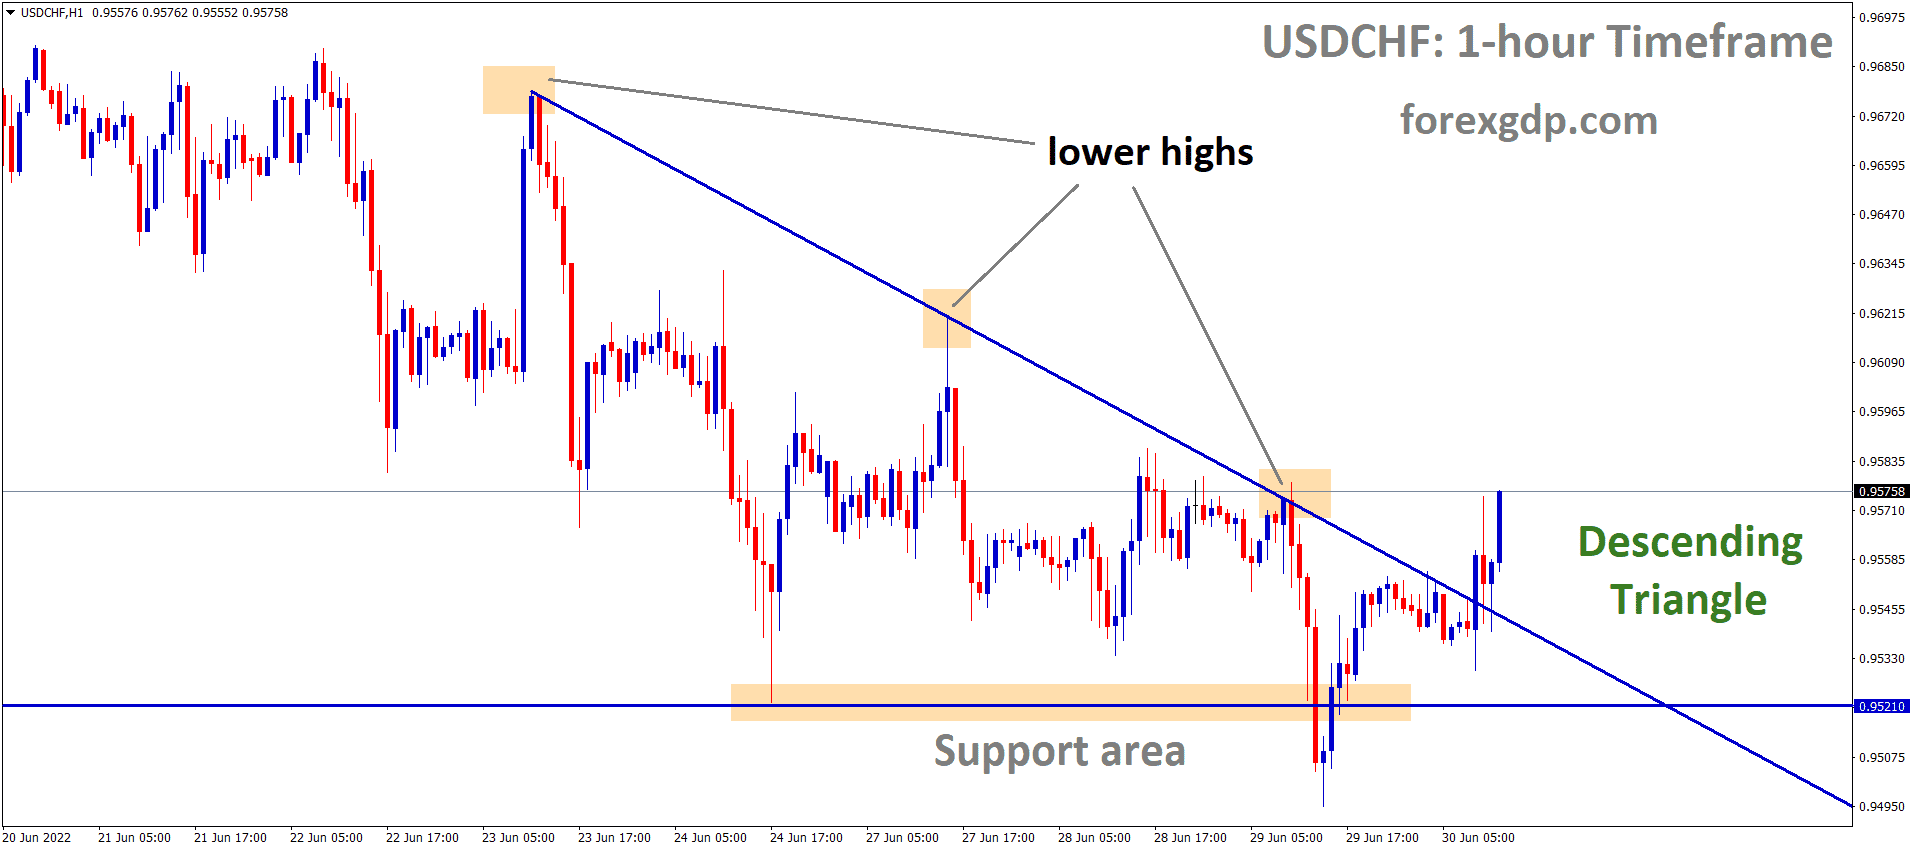 USDCHF is moving in the Descending triangle pattern and the Market has reached the Lower high area of the Pattern.